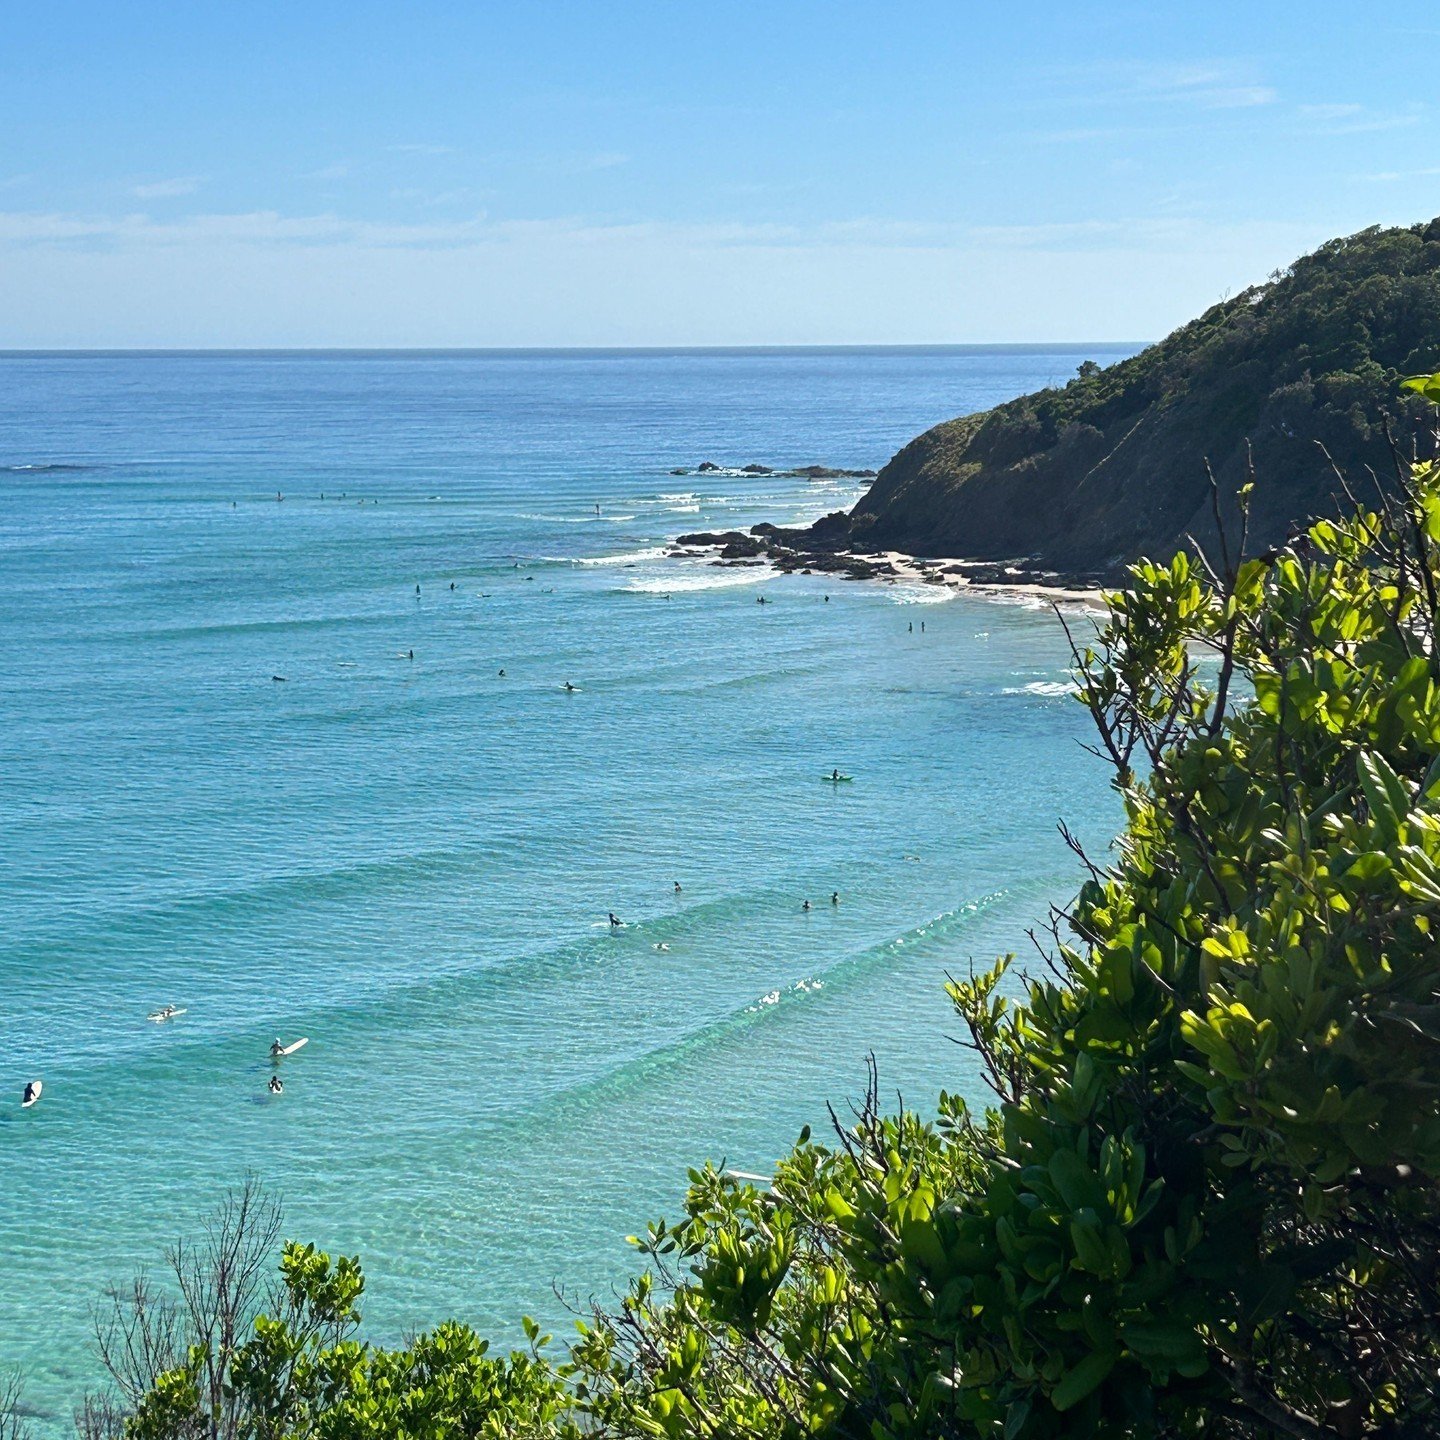 There are some amazing walking tracks in Byron Bay. The best part is you can enjoy these trails all year round. Some of our favourite walks:

🤍 Byron Bay Lighthouse - start and end at Clarkes Beach.
🤍 Minyon Falls offers a range of options from sho